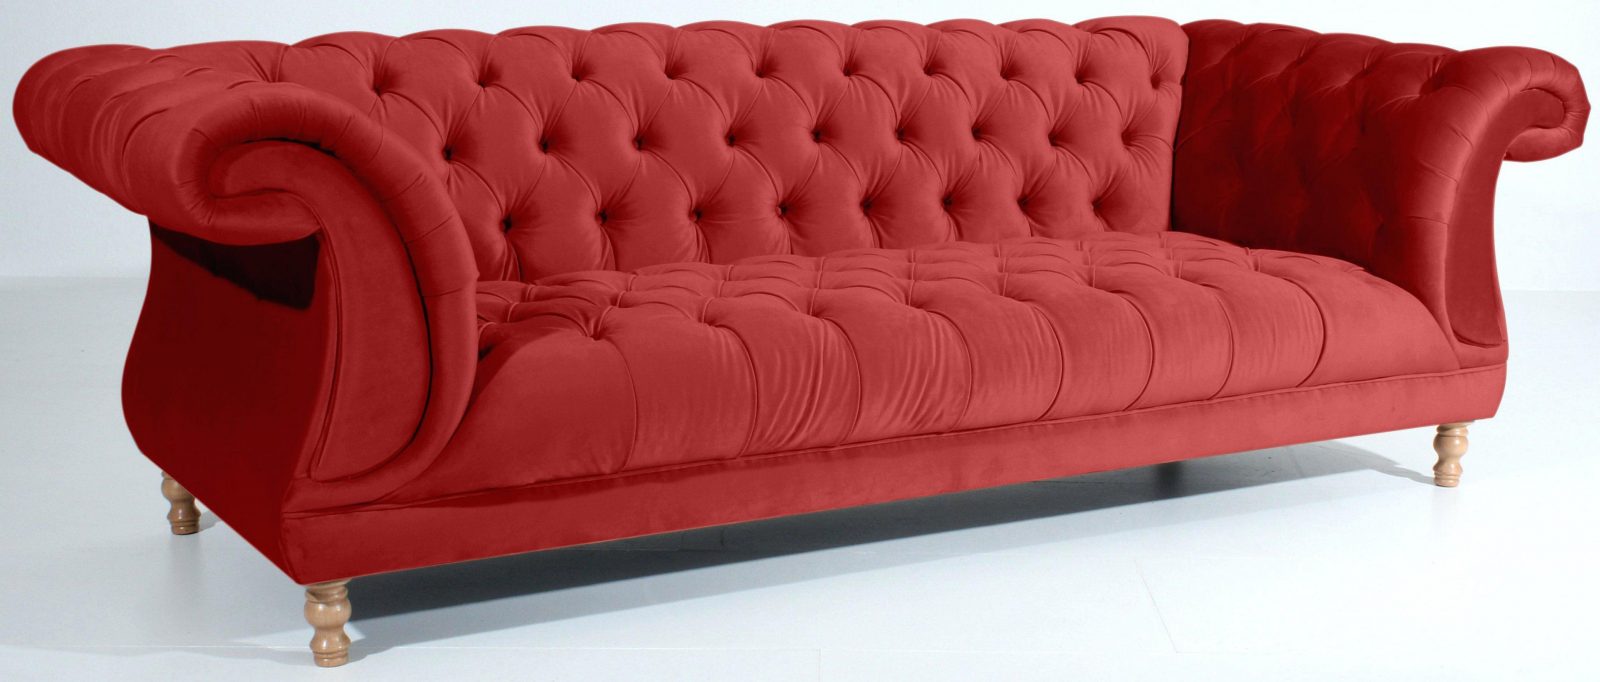 Sofa 3 Meter Breit Max Chesterfield 3 Sofa Couch 3 Meter Breit von Sofa 3 Meter Breit Bild